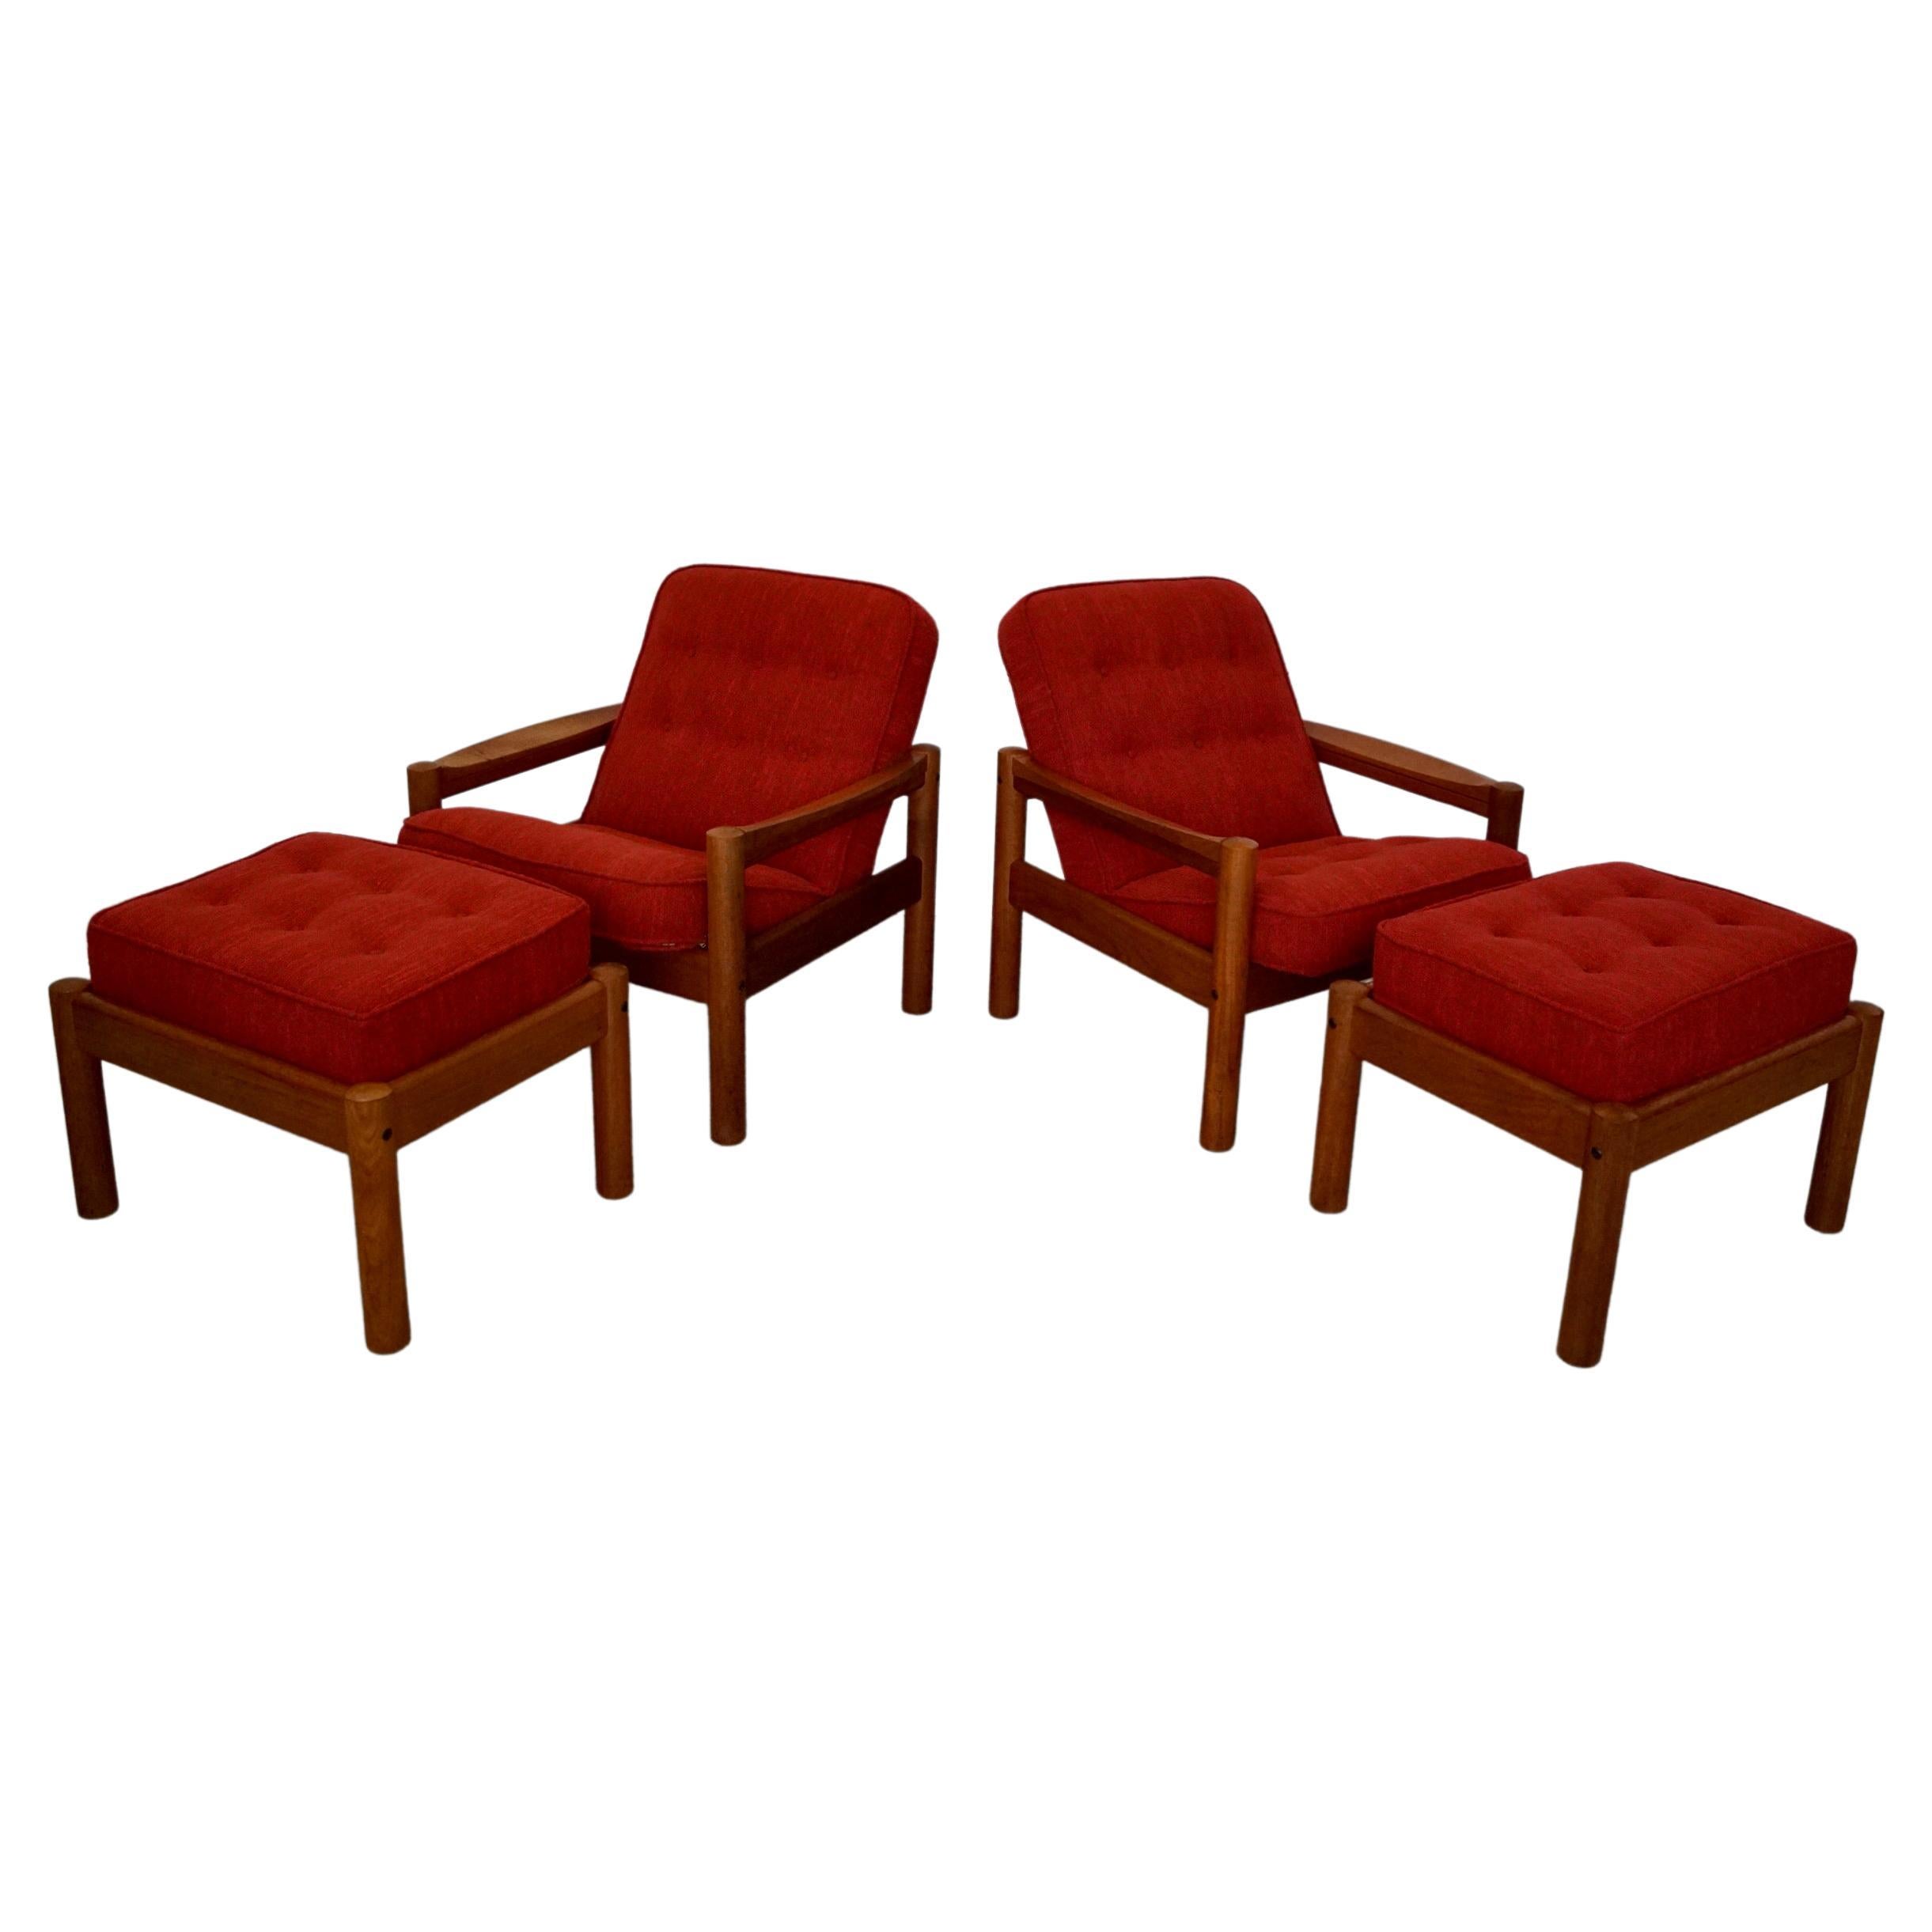 1970's Danish Modern Teak Lounge Chairs by Domino Mobler - a Pair For Sale